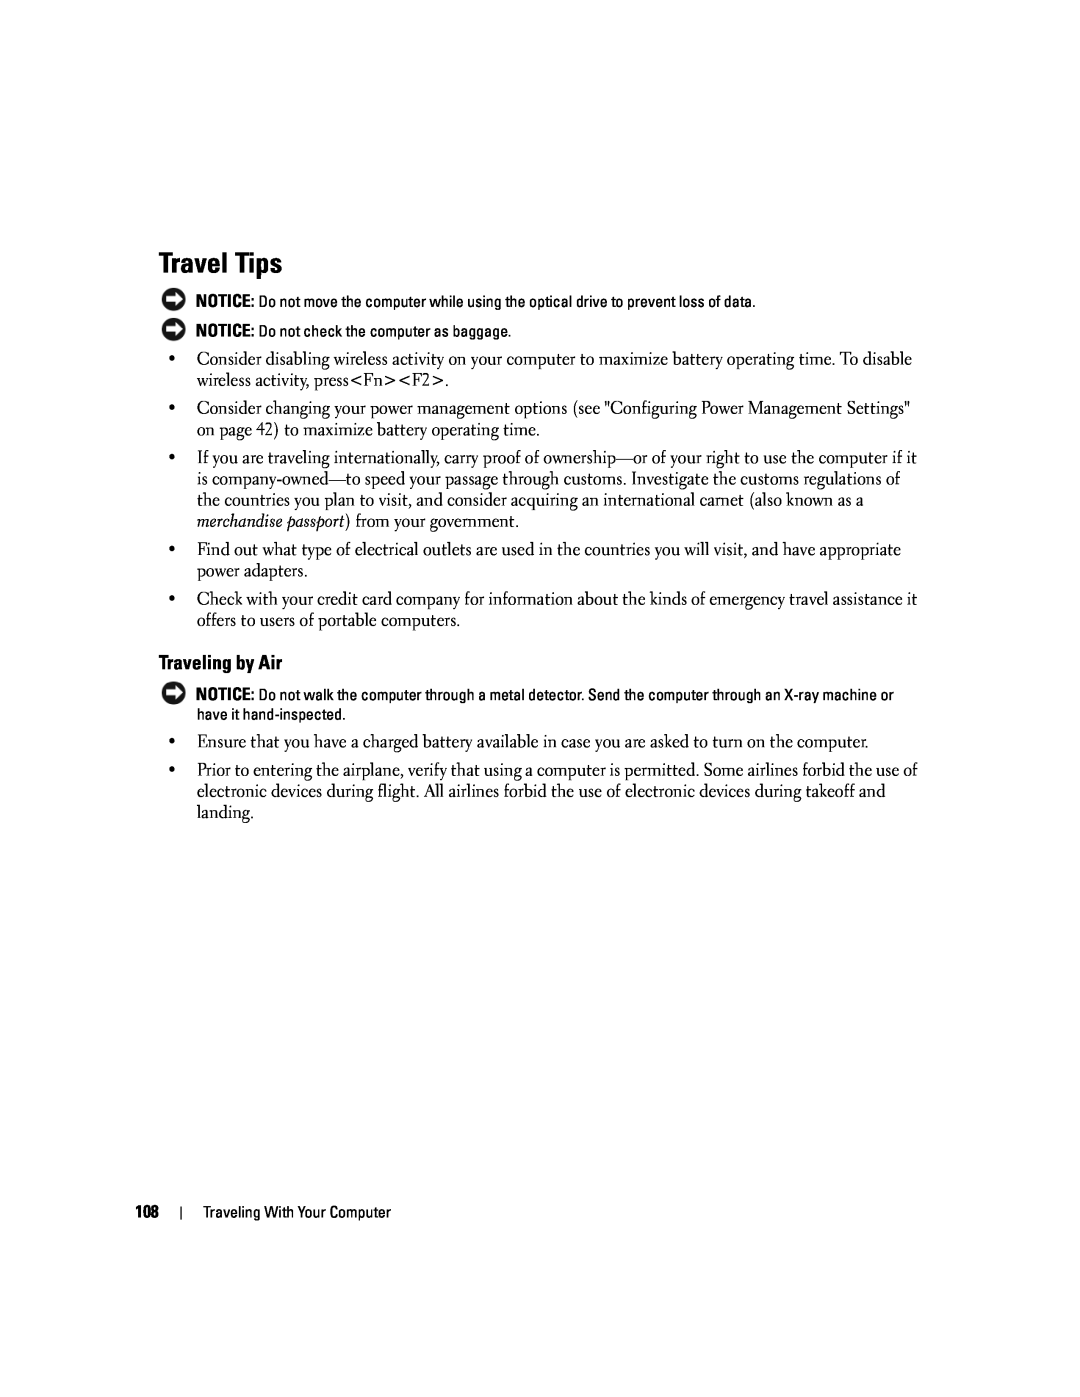 Dell 1501 owner manual Travel Tips, Traveling by Air 